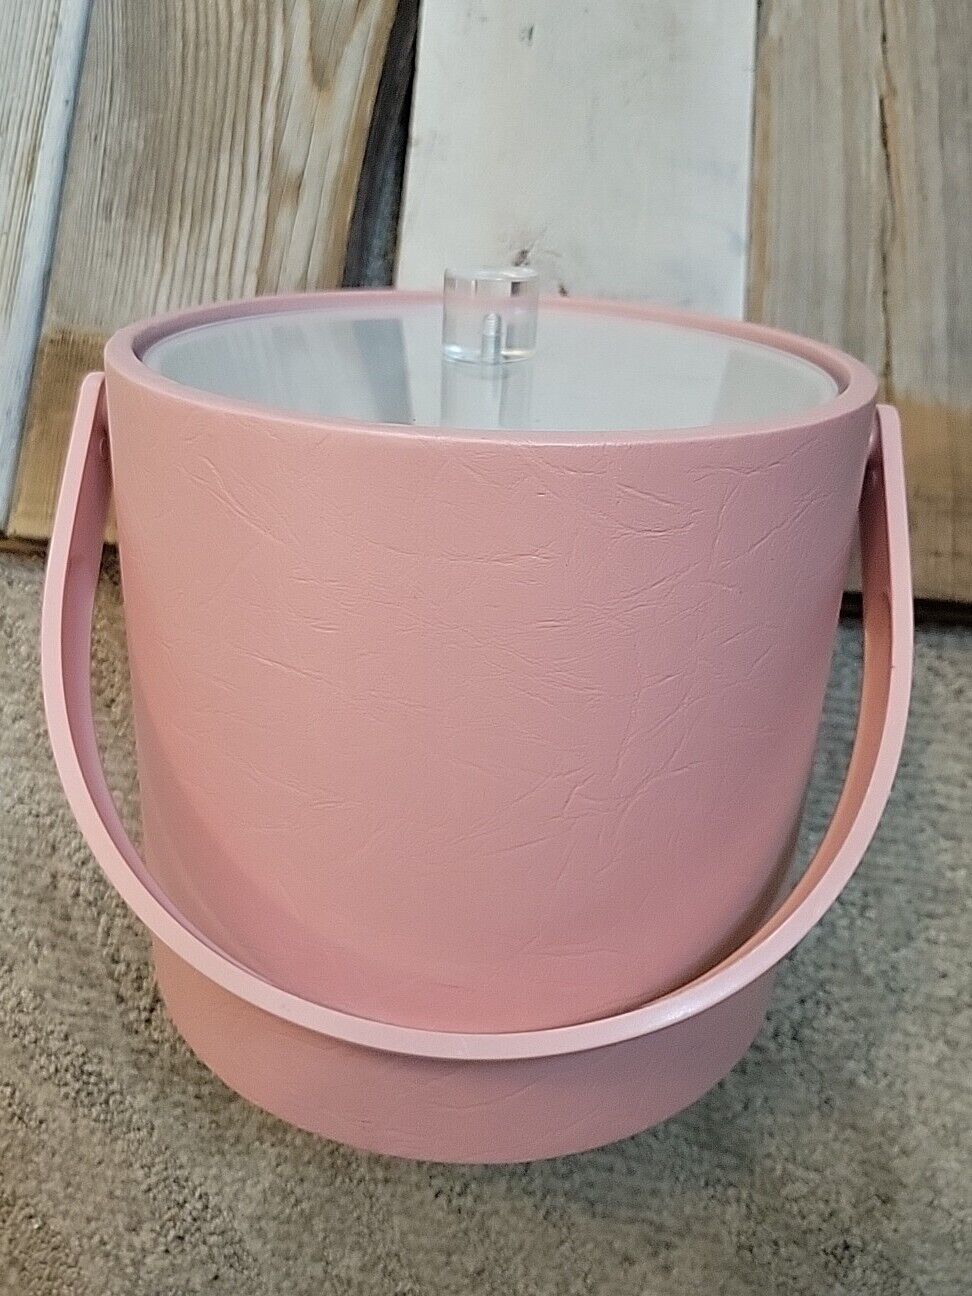 Mr Ice Bucket Vintage Pink Faux Leather With Plastic Handle Clear Lid Made In...